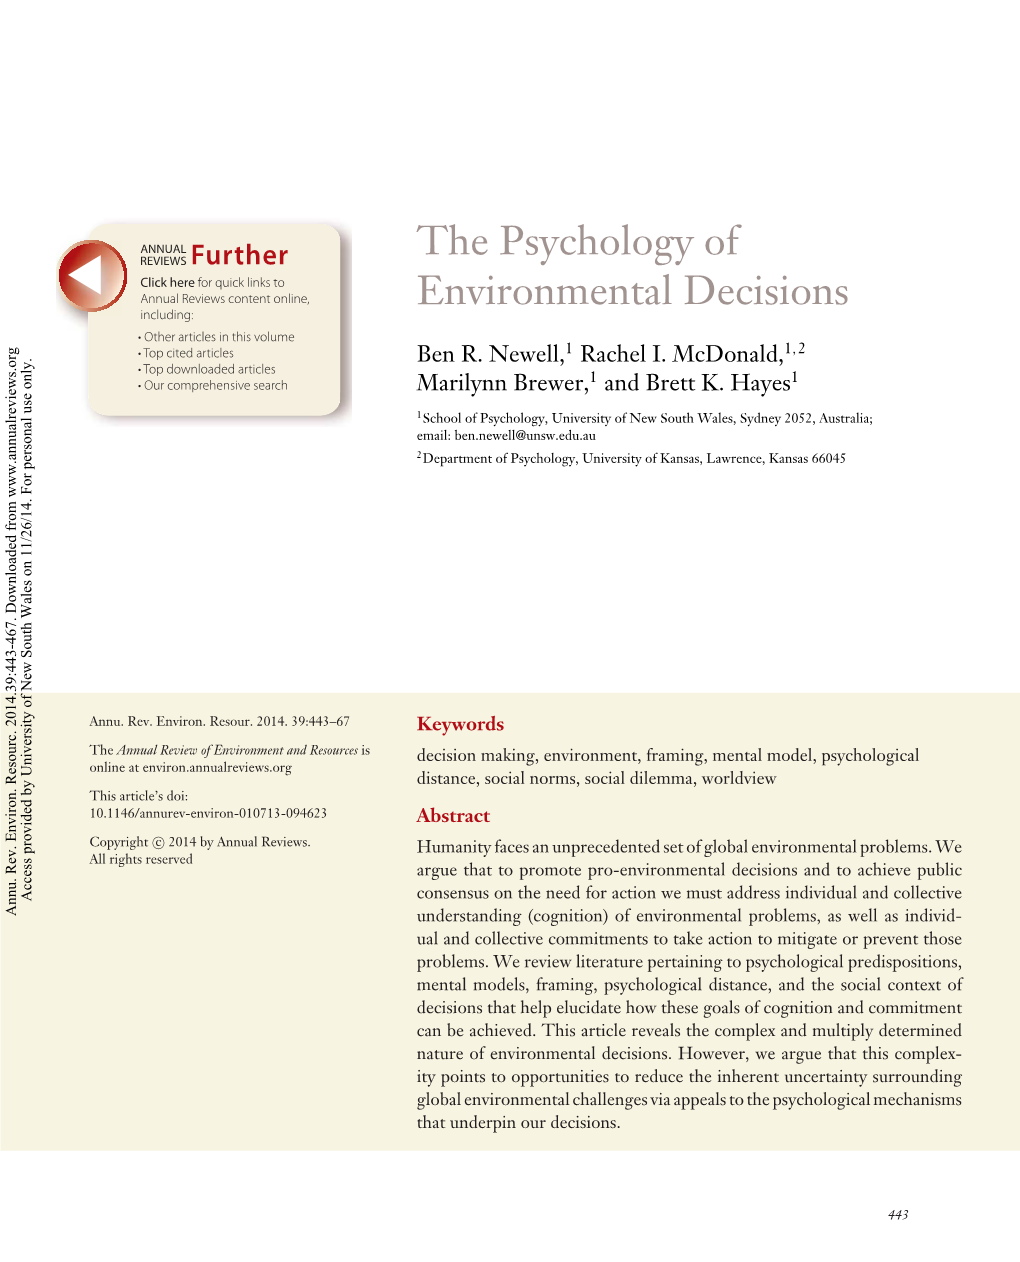 The Psychology of Environmental Decisions